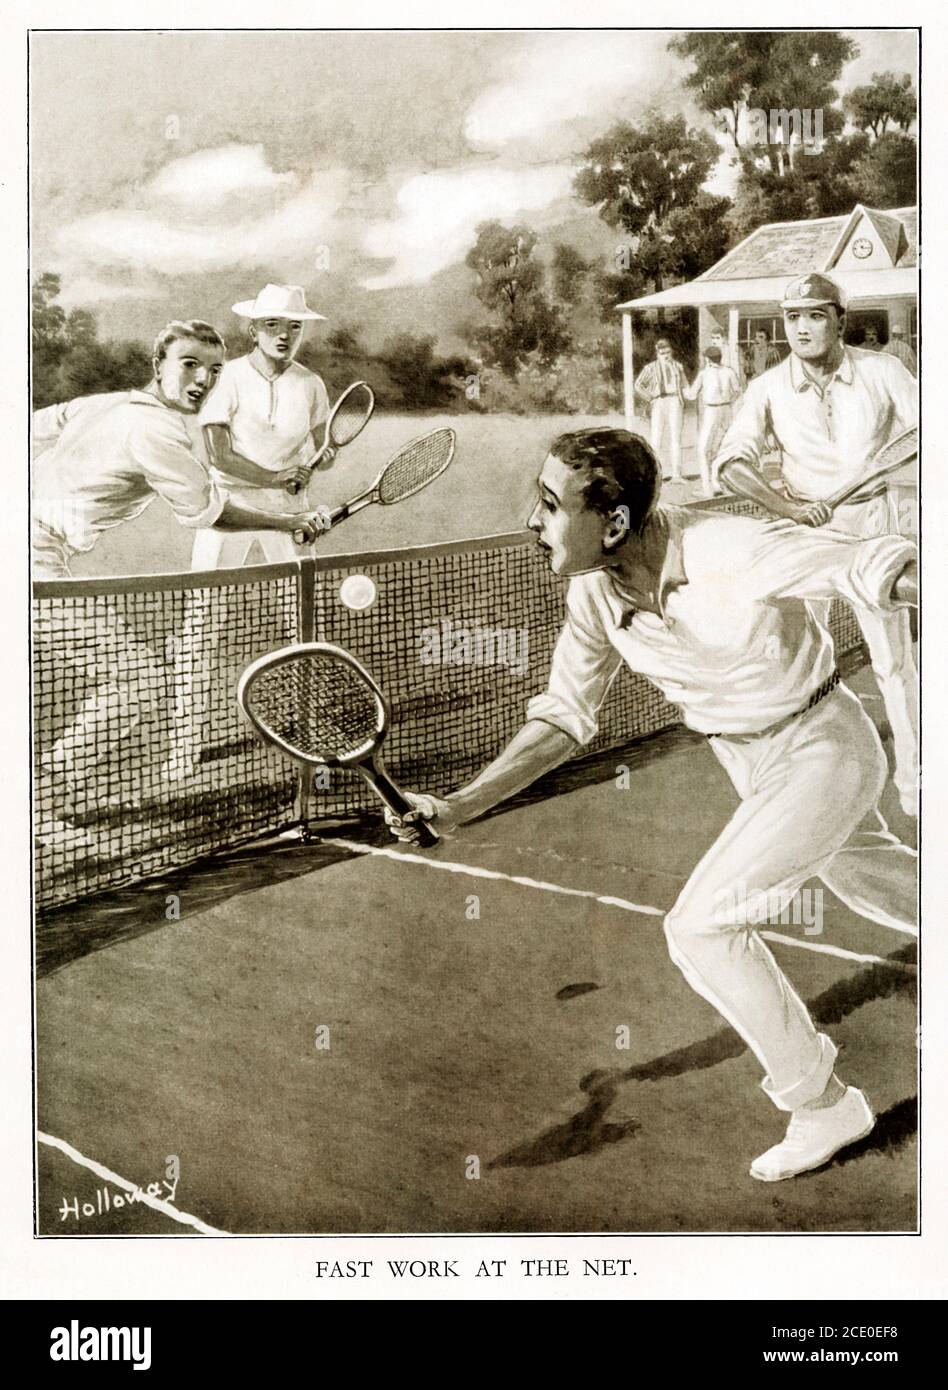 Fast Work At The Net, 1920s illustration of tennis match action with a smartly taken volley at close quarters in a tight doubles match Stock Photo